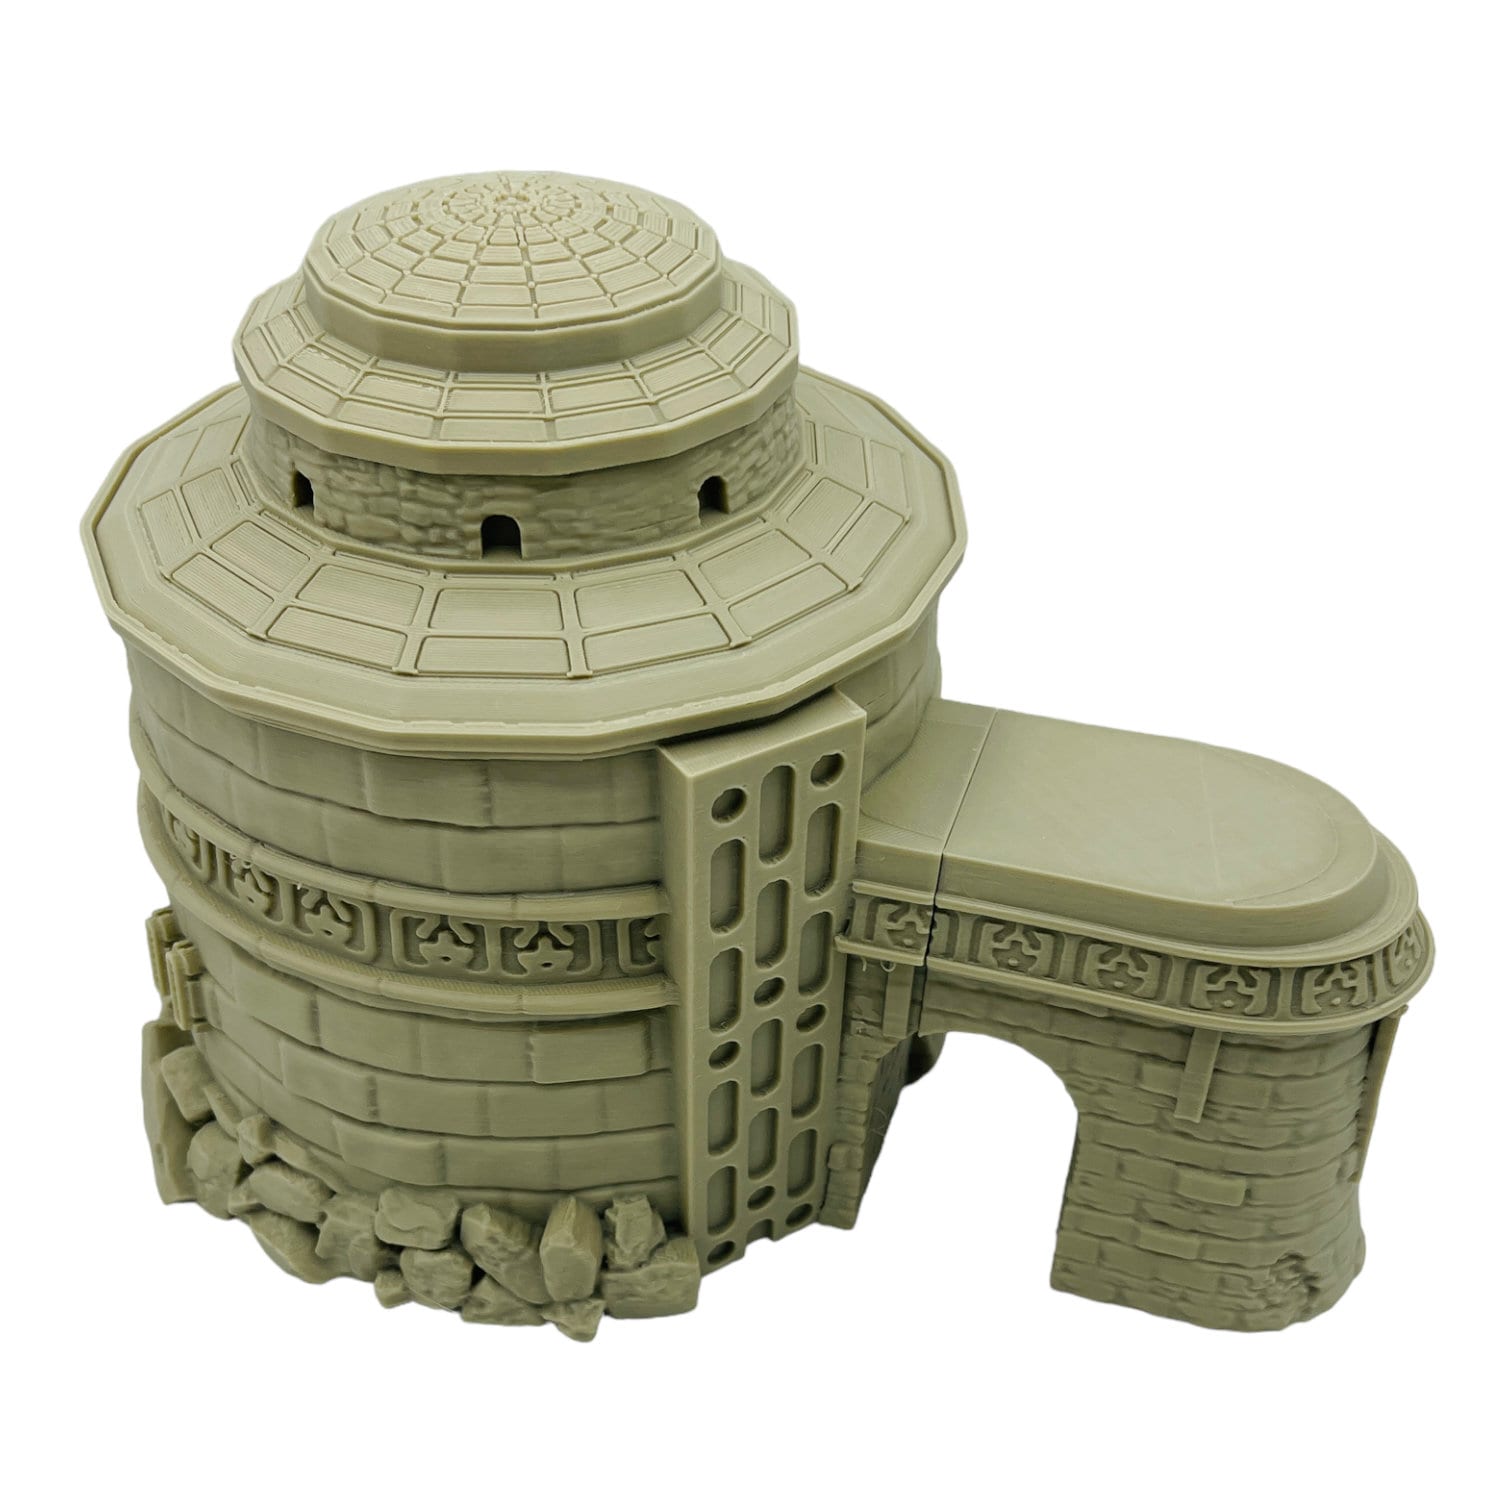 Bo'Ghtan's Antiquities/ Multiverse / Ancient Starport / Legion and Sci-Fi 3D printed tabletop terrain for wargames / Licensed Printer